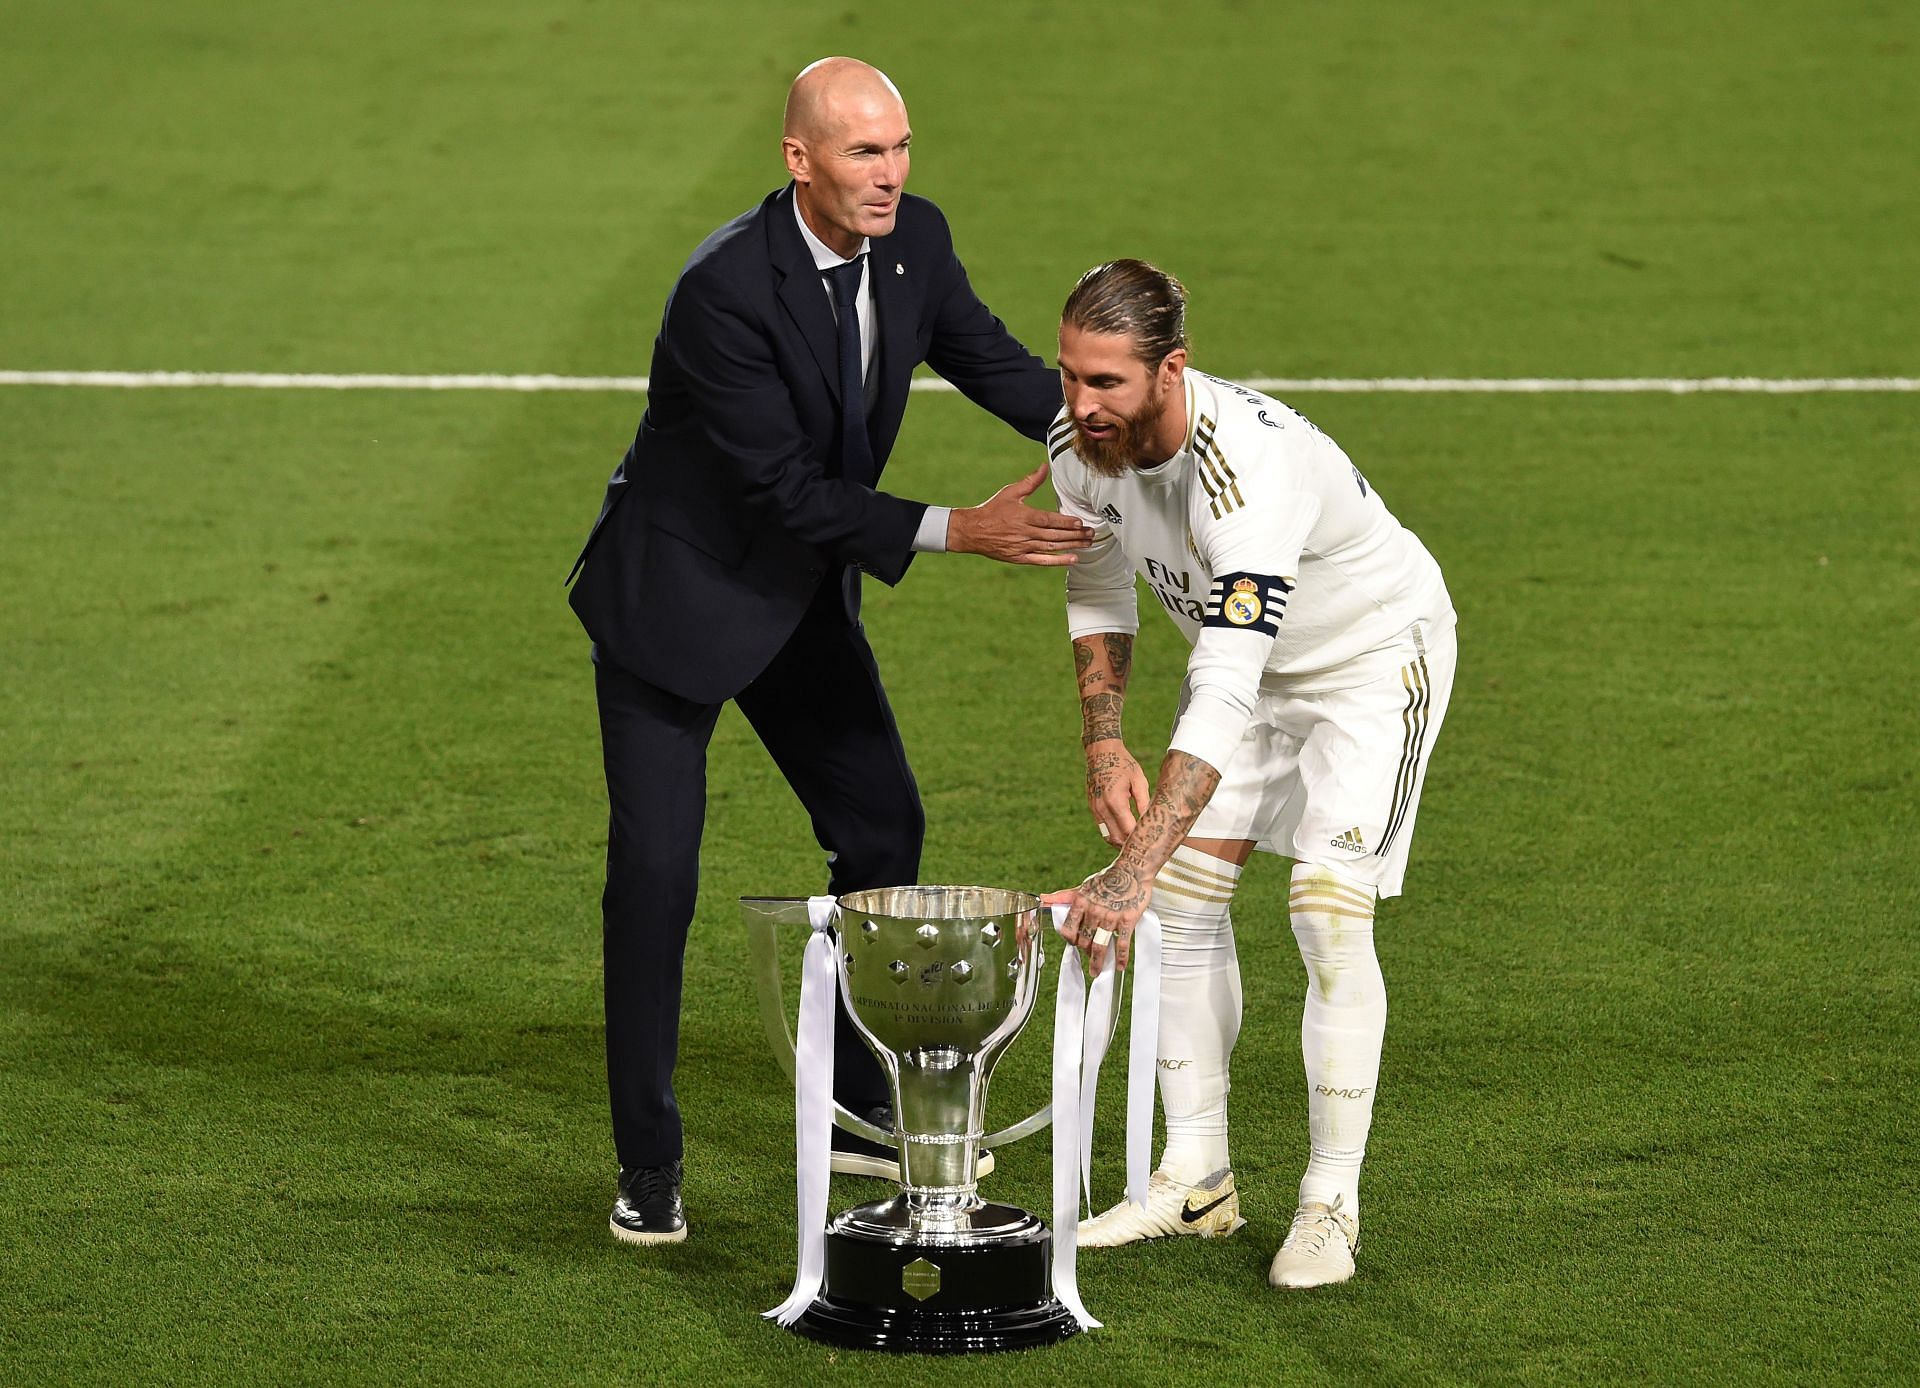 Sergio Ramos (right) won multiple titles during his stint with Real Madrid.